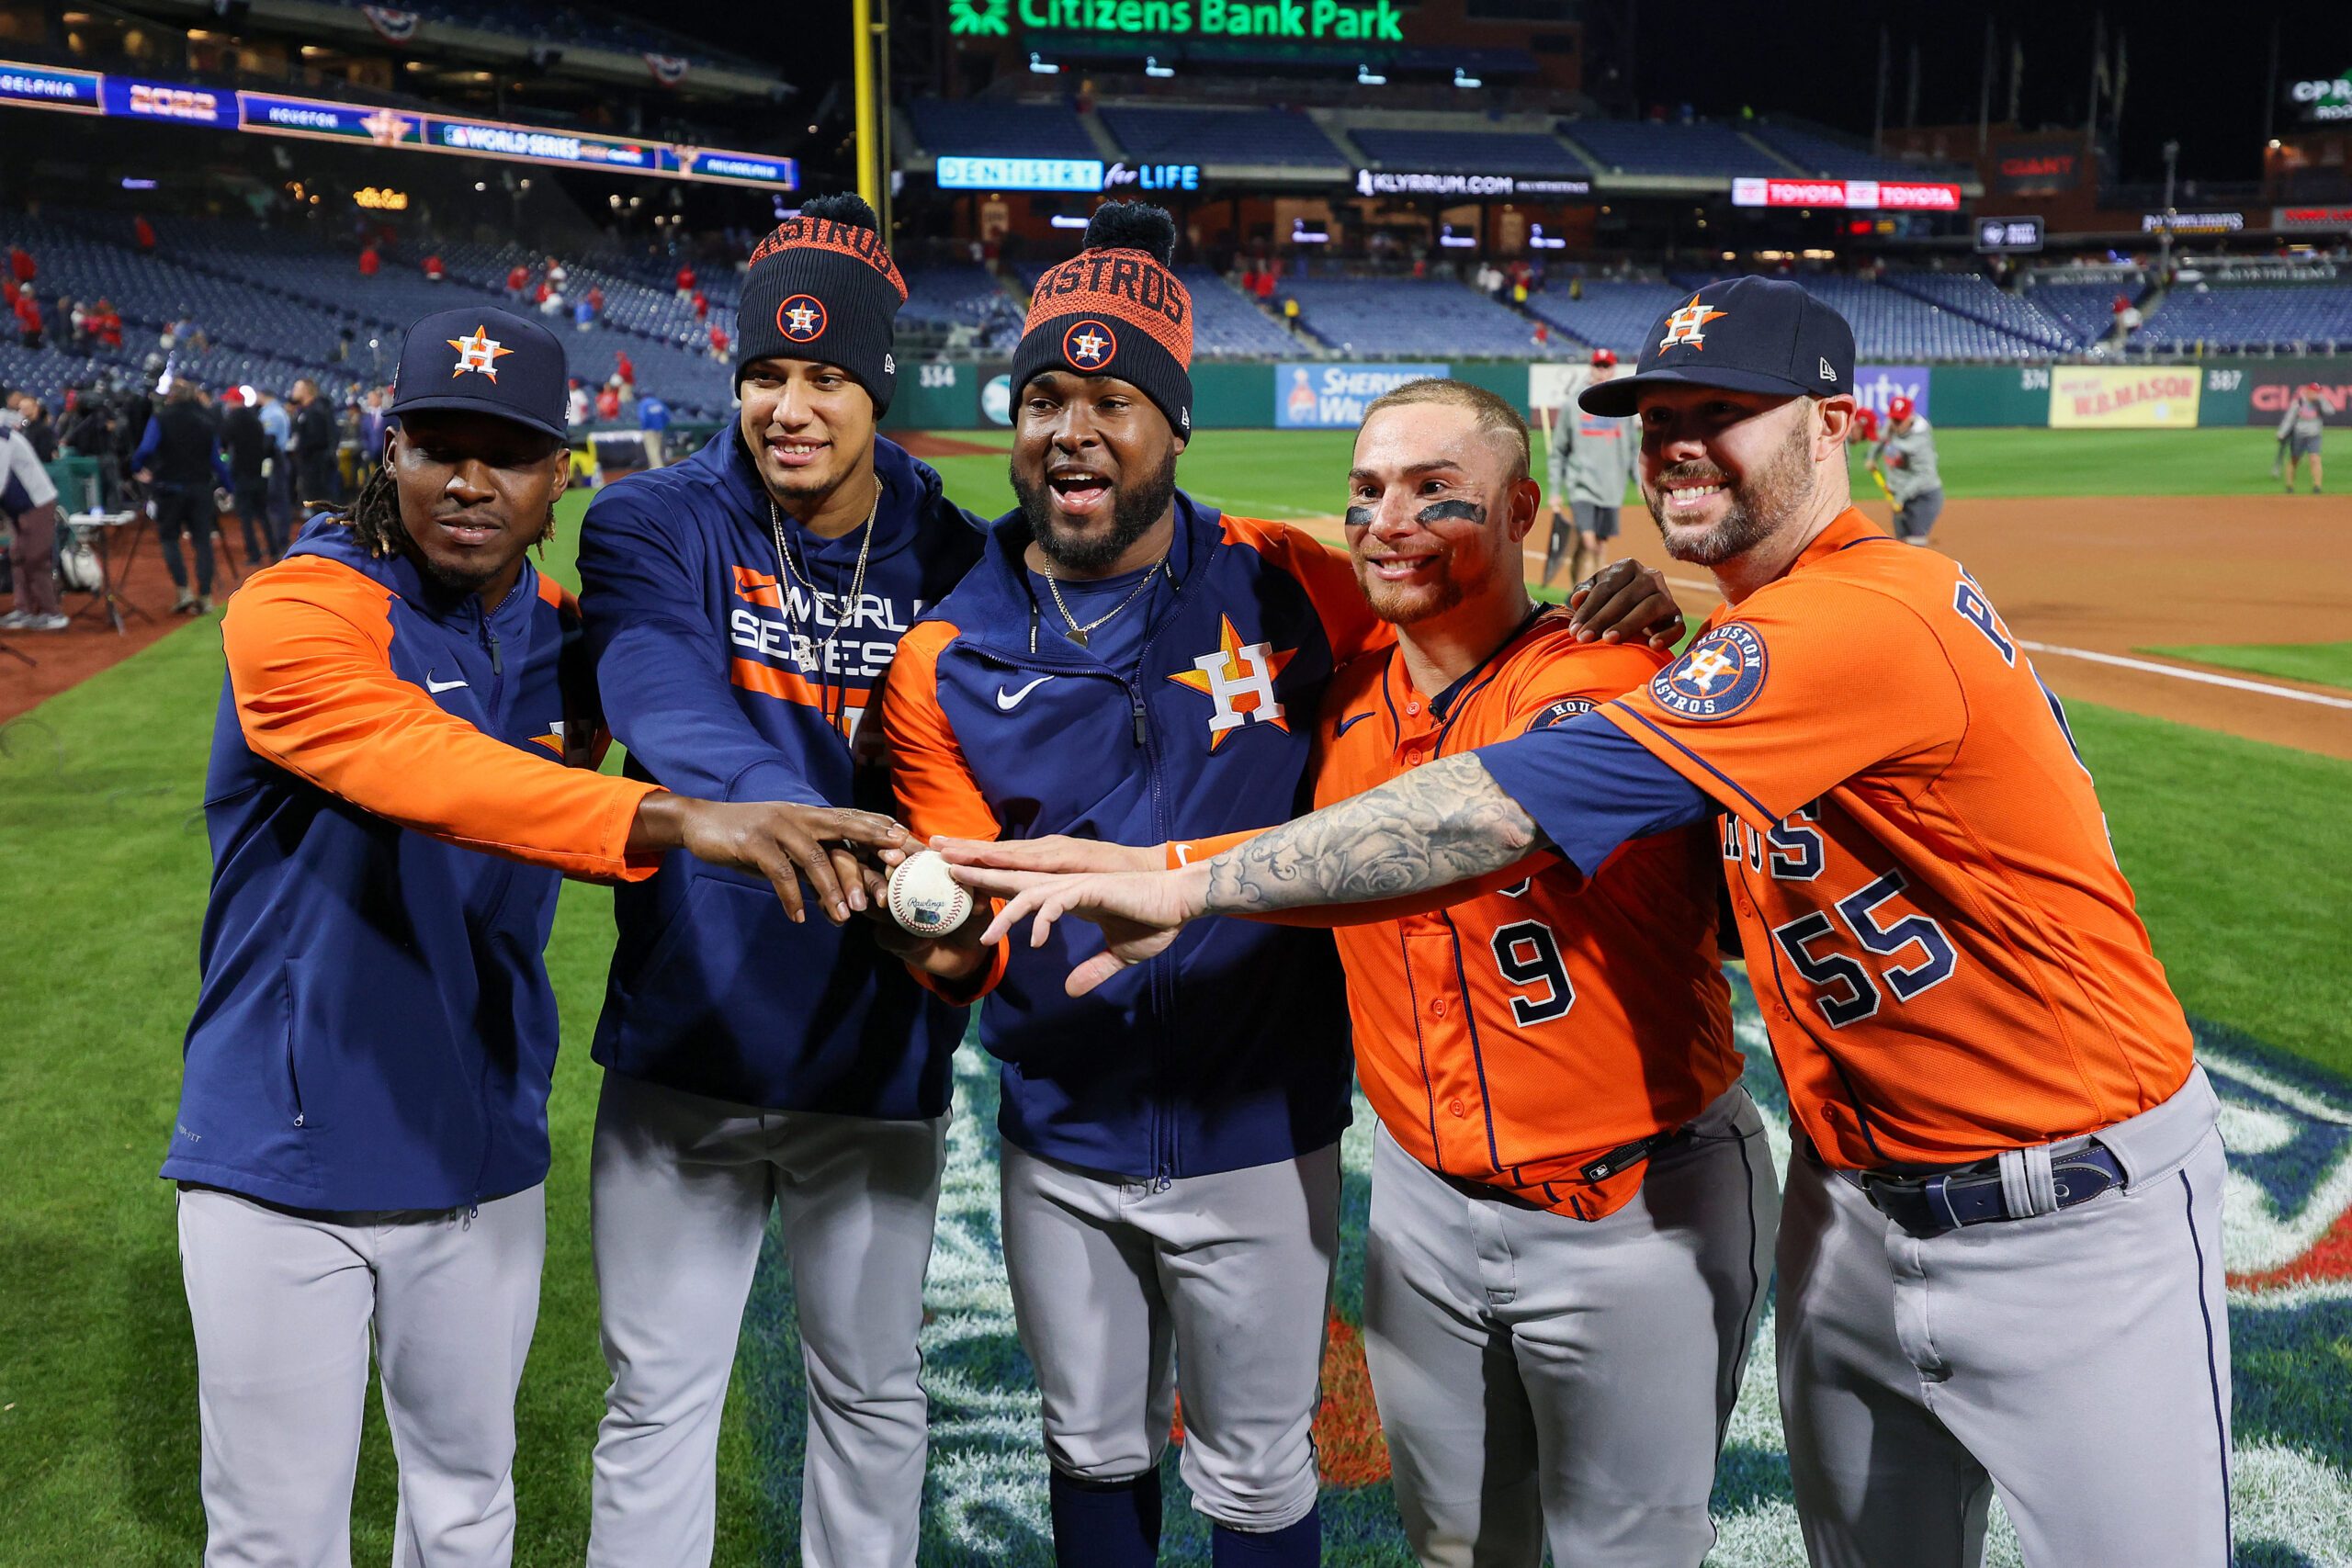 The Houston Astros pitchers make history and record a World Series